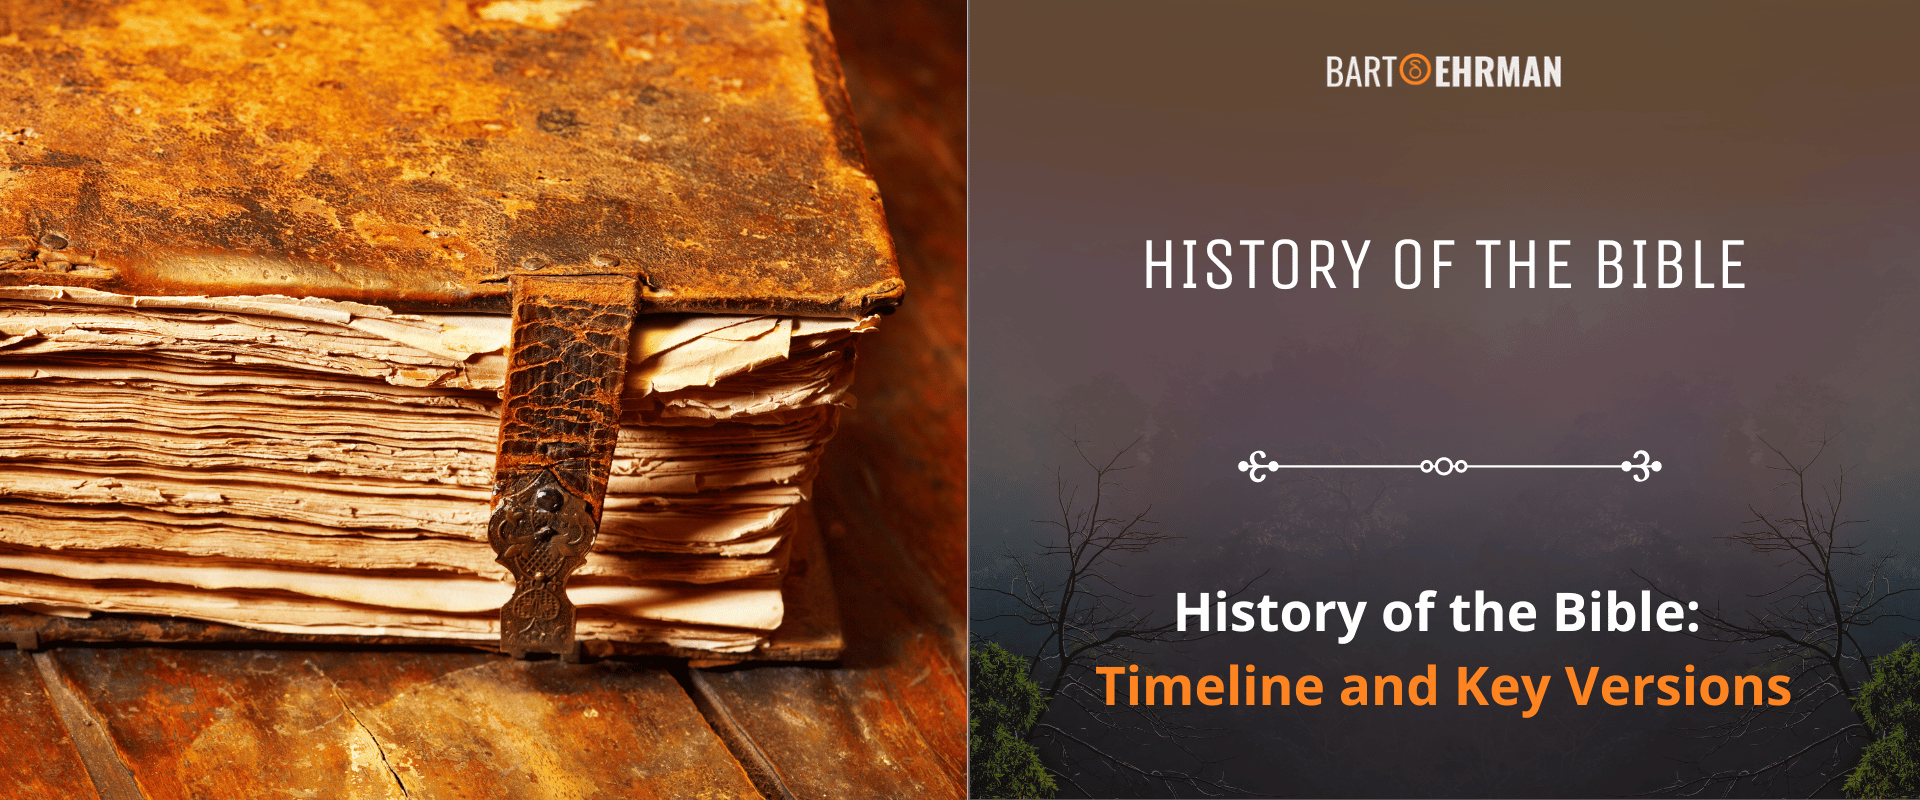 History of the Bible - Timeline and Key Versions